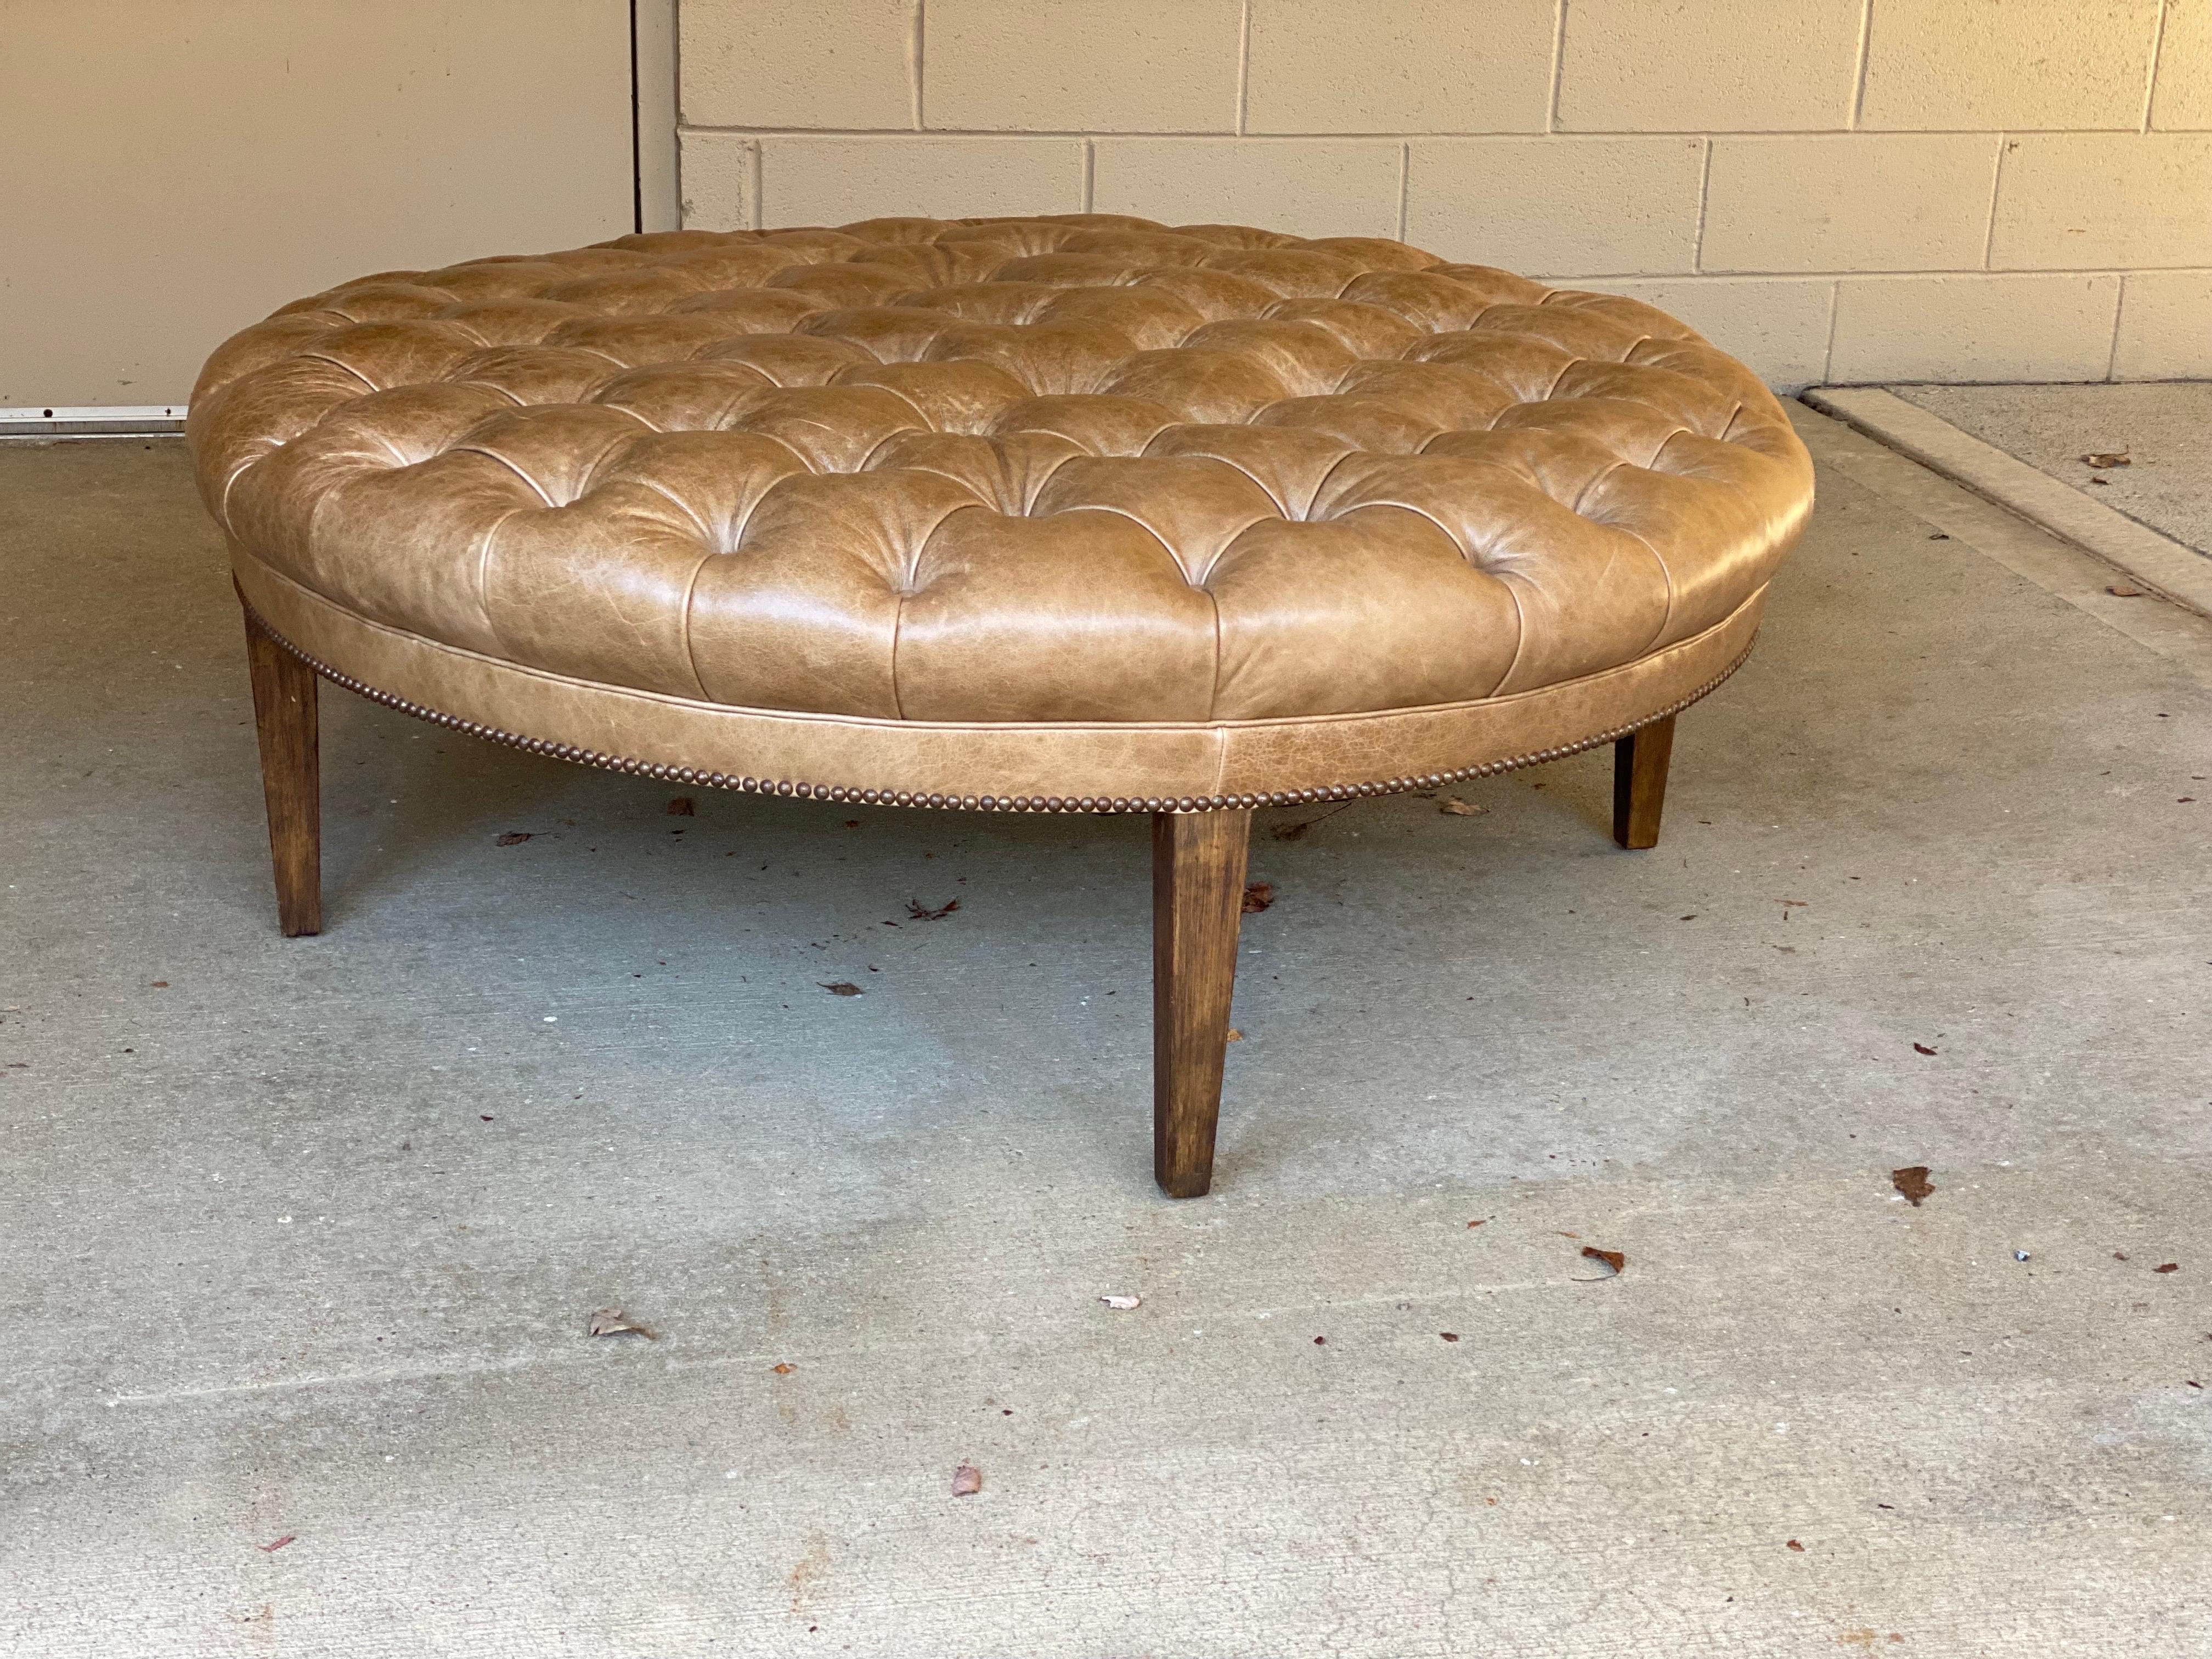 Custom Fabricated large round leather tufted ottoman/coffee table
A quality and well made solid wood ottoman with cerused oak legs and taupe tufted leather. This is a lovely piece, ready to go. Maker unknown but thought to have come from a